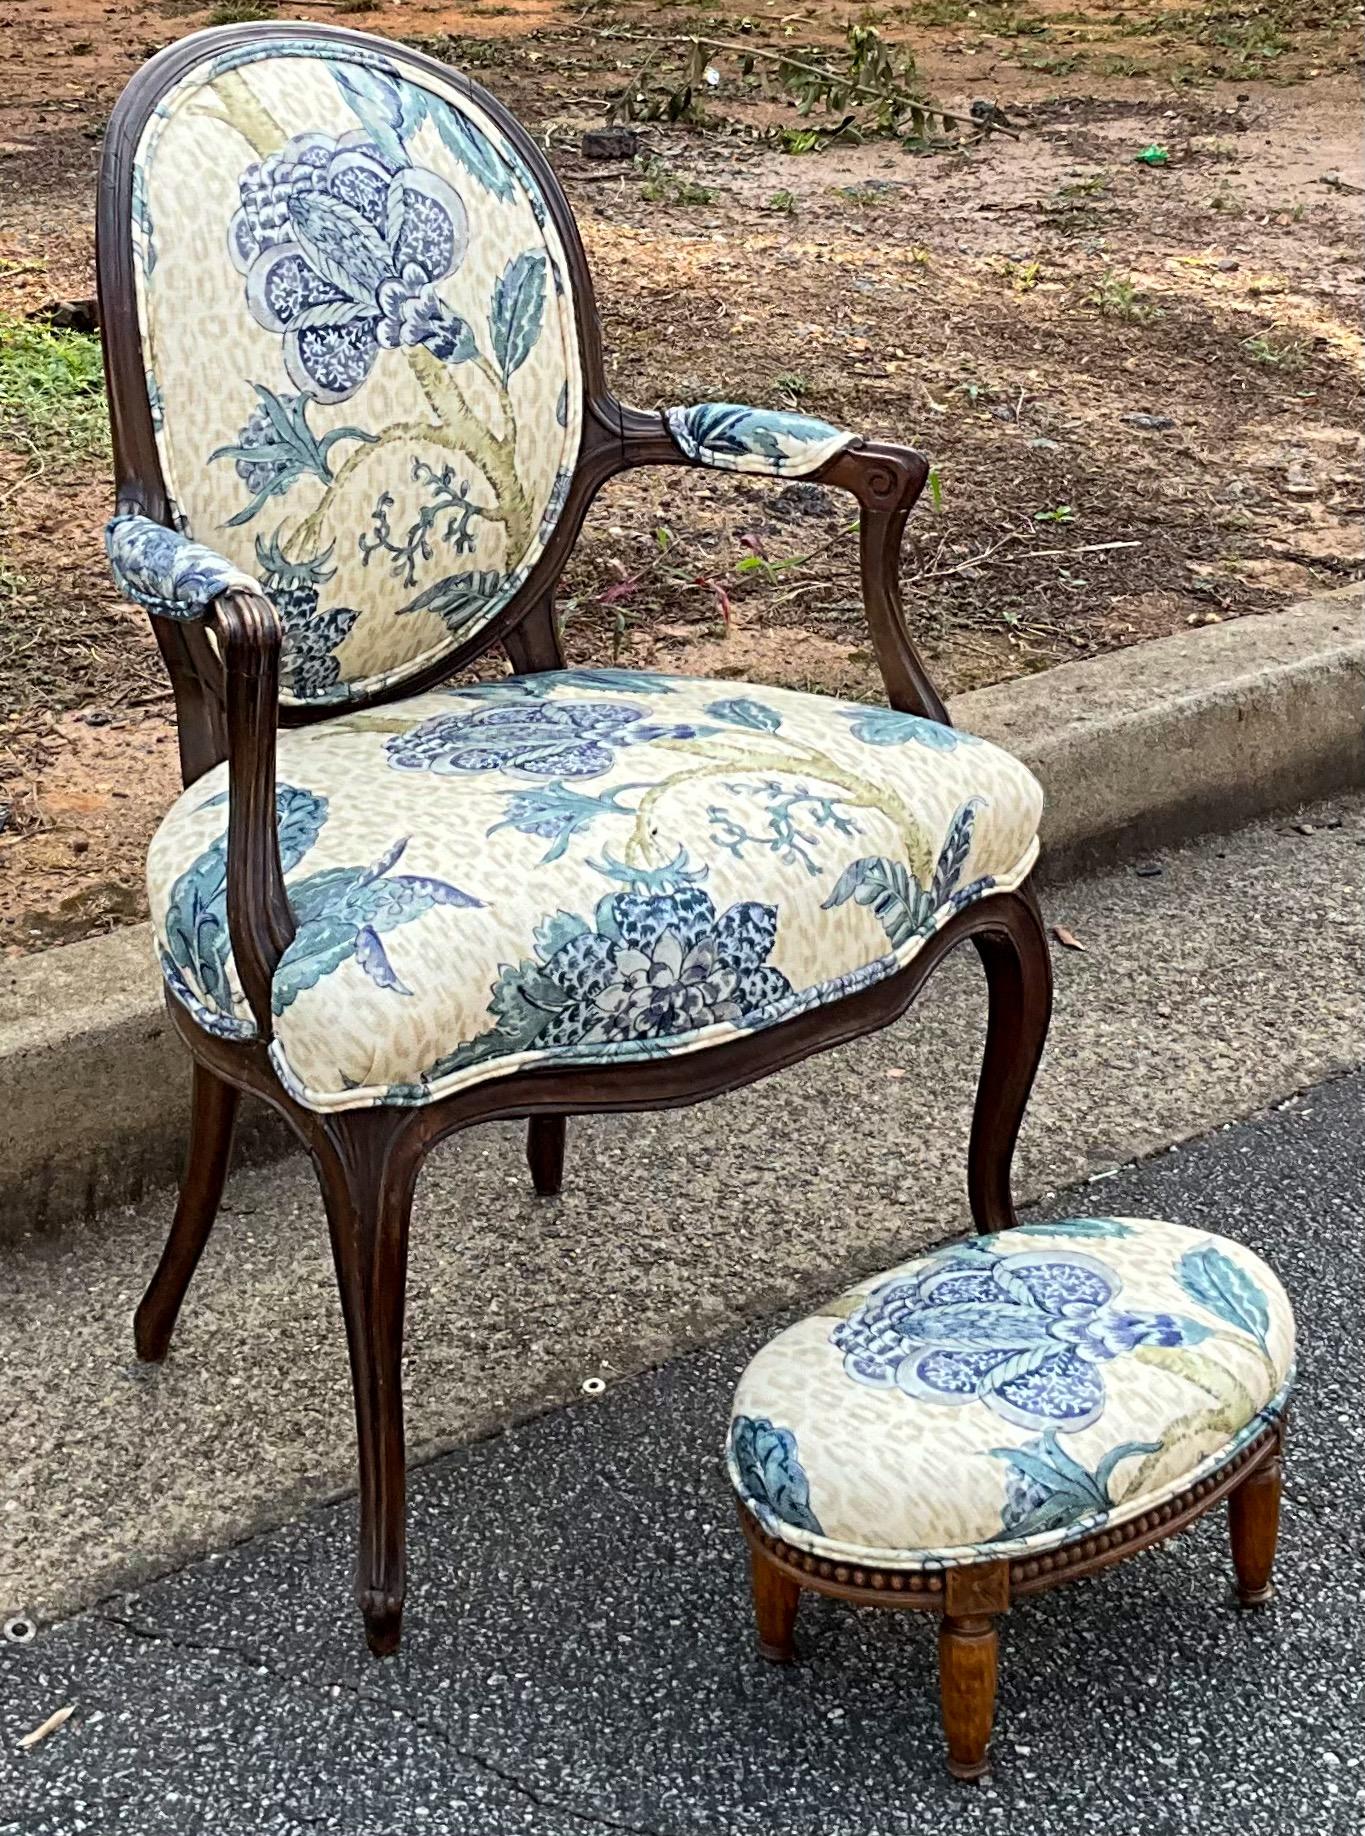 Antique French Fruitwood Berger Chair & Ottoman In Blue Floral & Leopard - S/2 For Sale 2